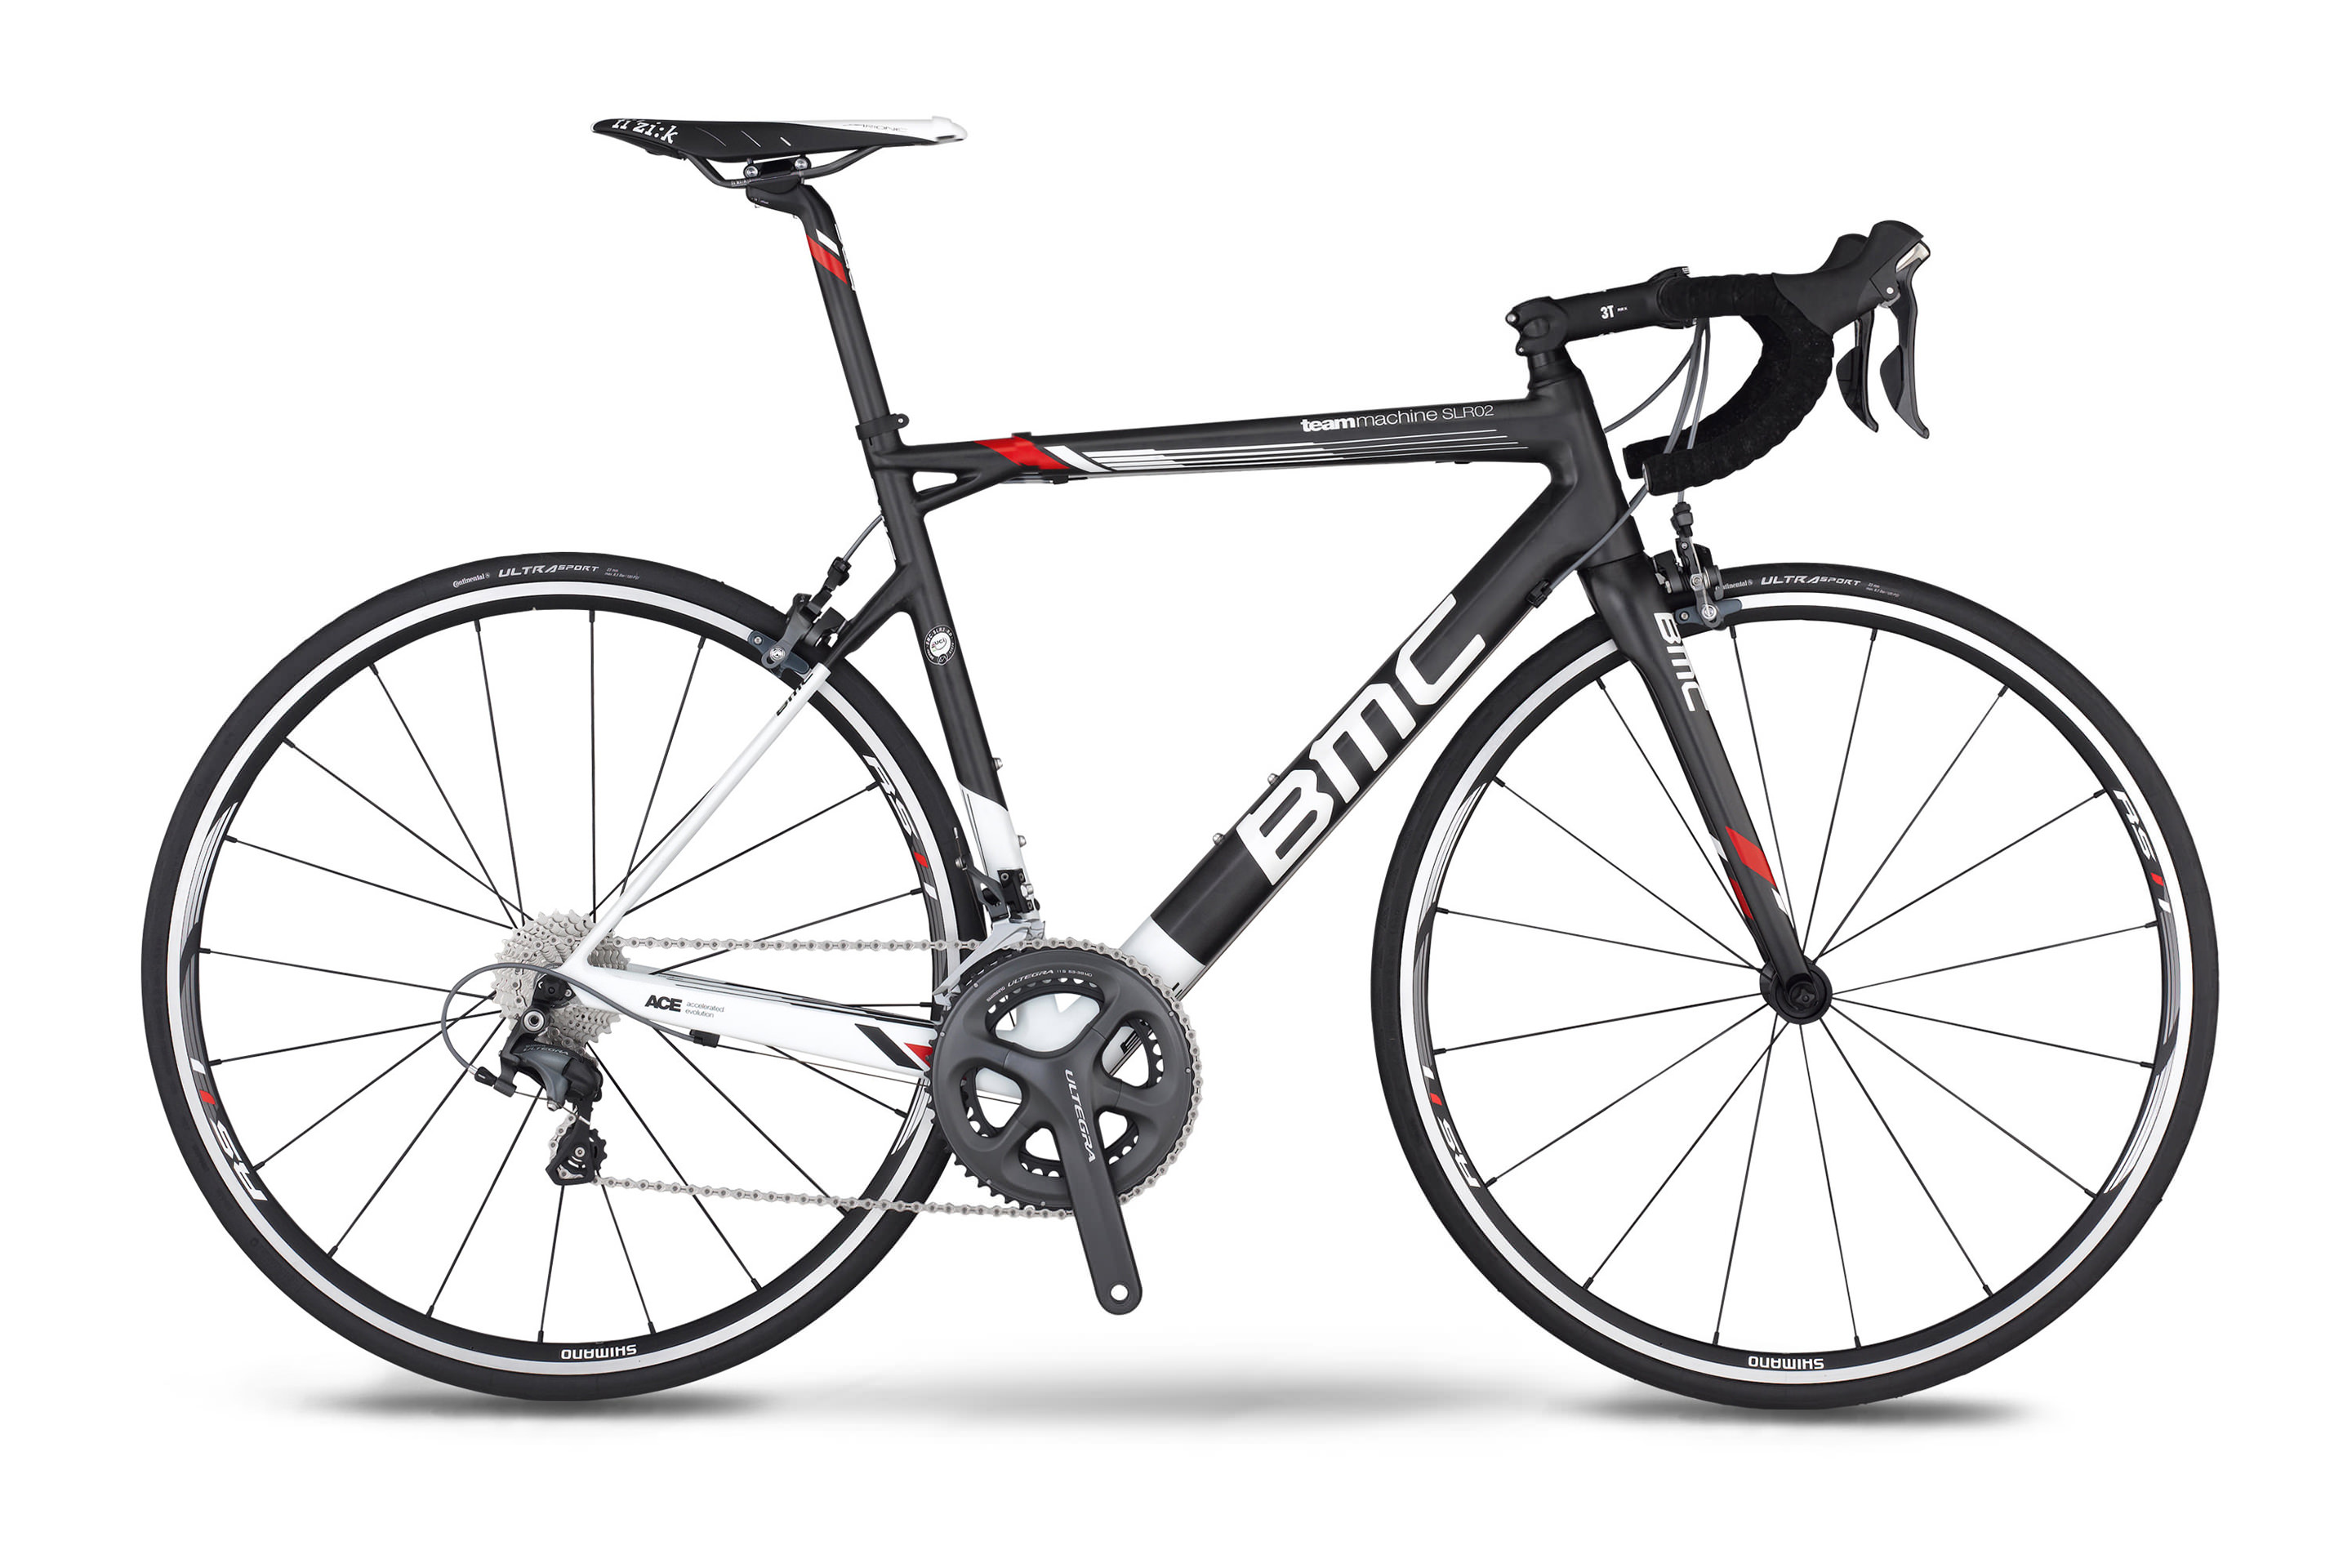 2014 TeamMachine SLR02 Ultegra | Bouticycle